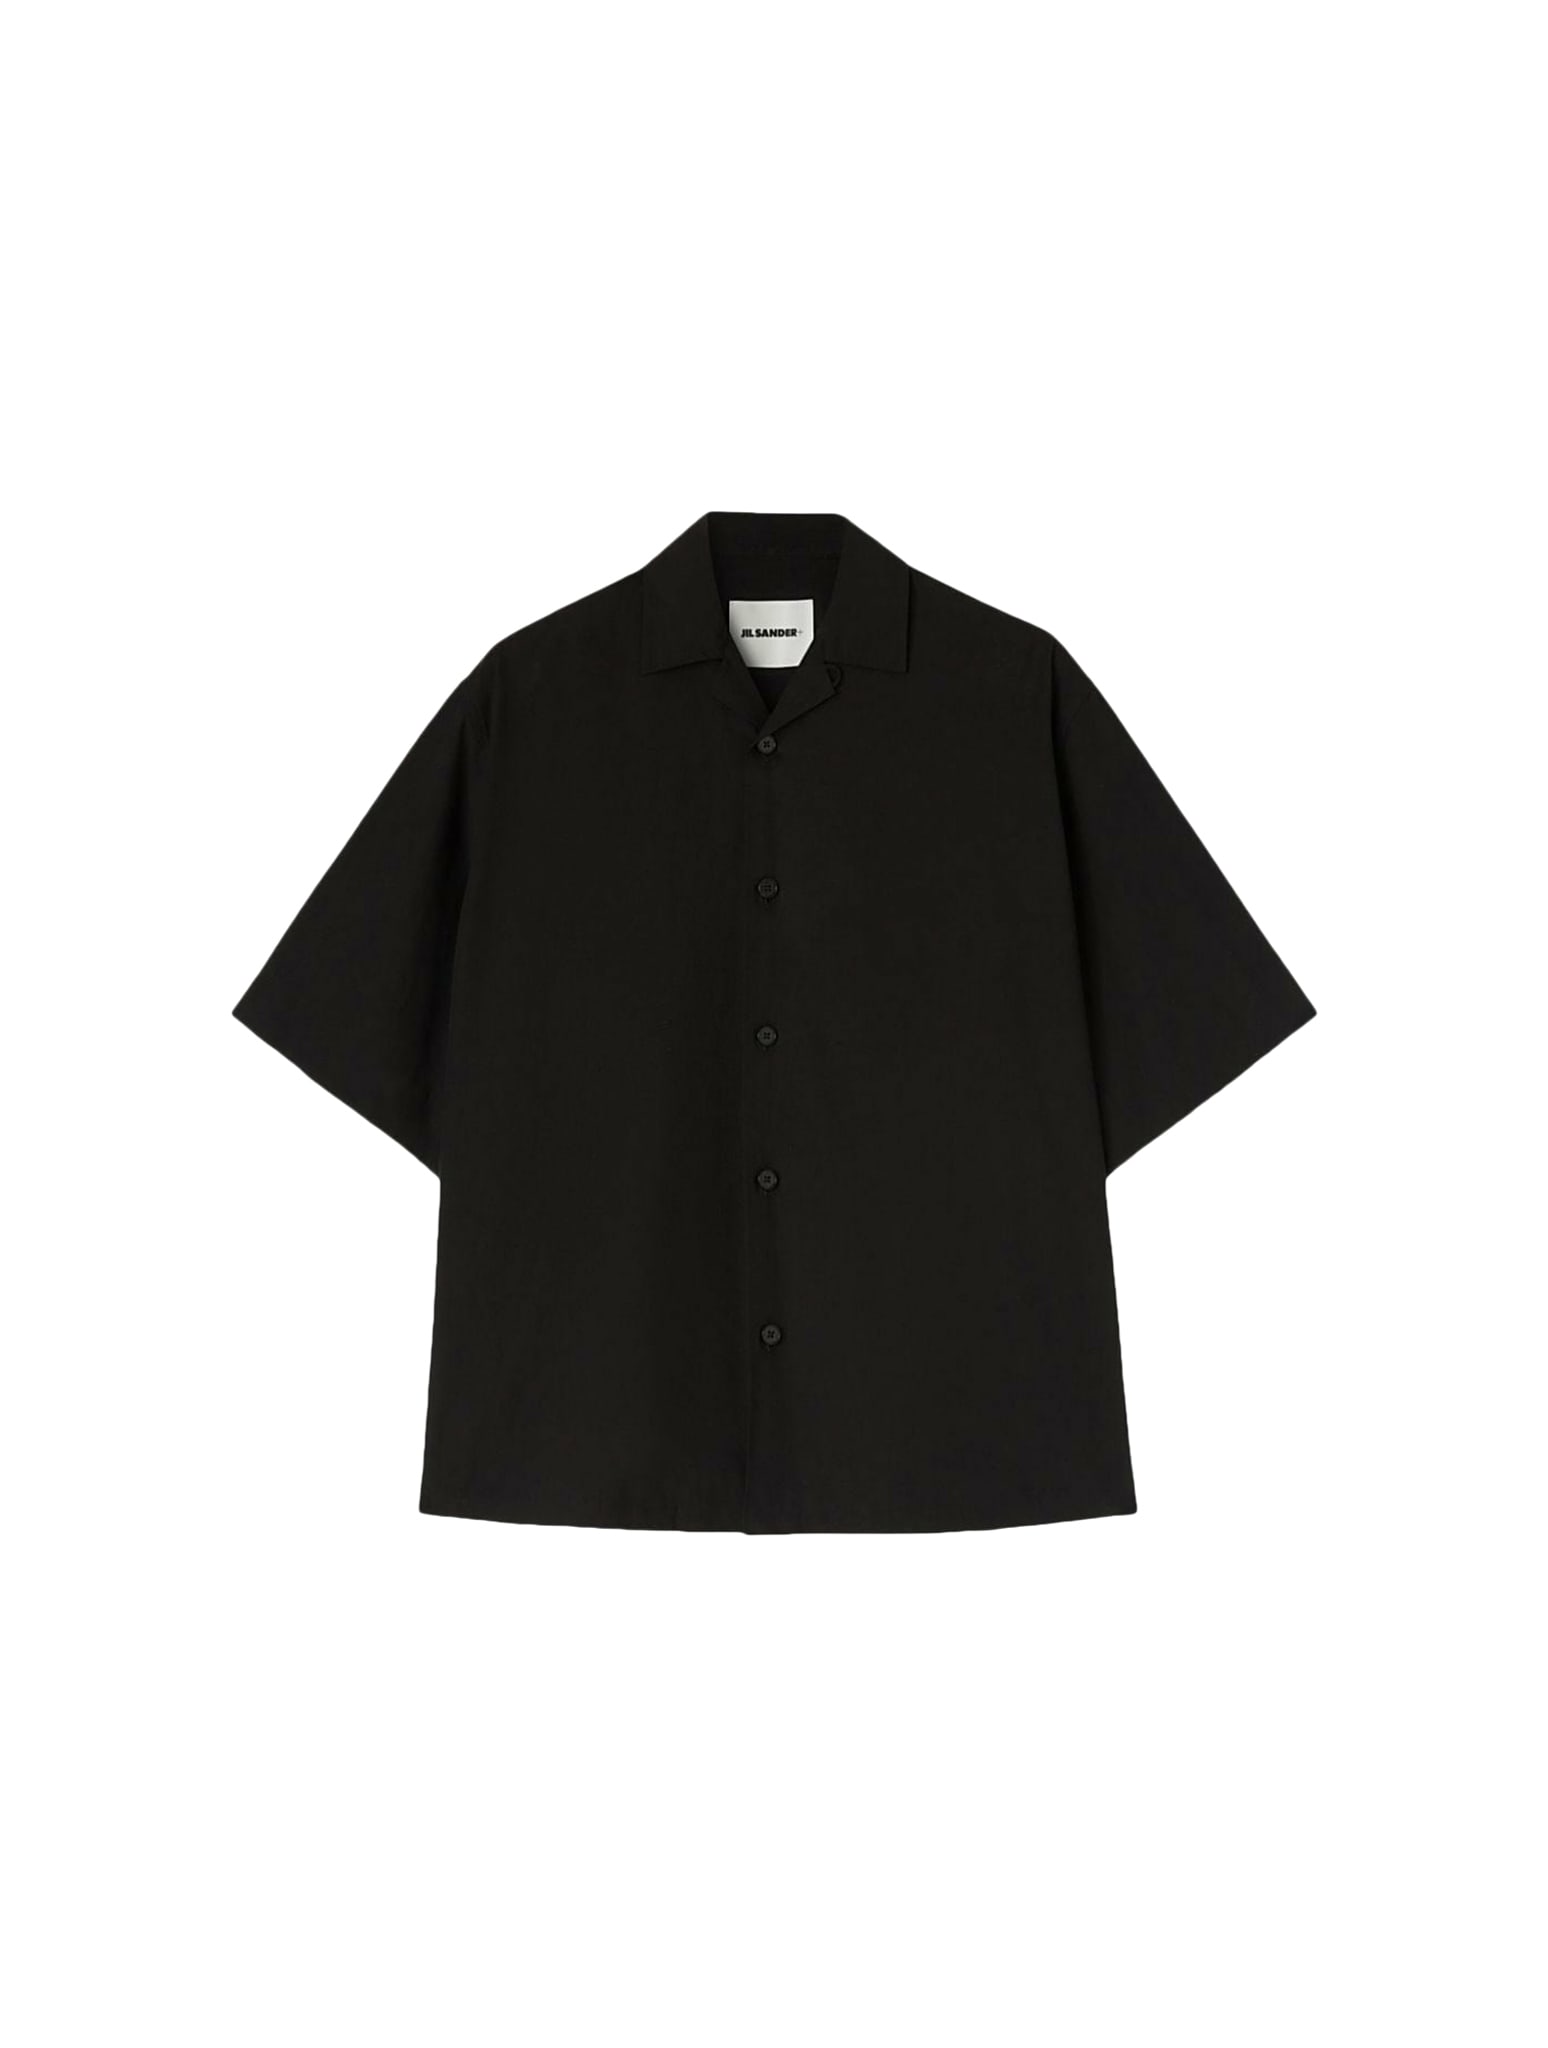 JIL SANDER BOXY FIT SHORT SLEEVE SHIRT, OPEN BOWLING SHIRT COLLAR, FRONT CLOSURE WITH FIVE BUTTONS, CLASSIC YOK